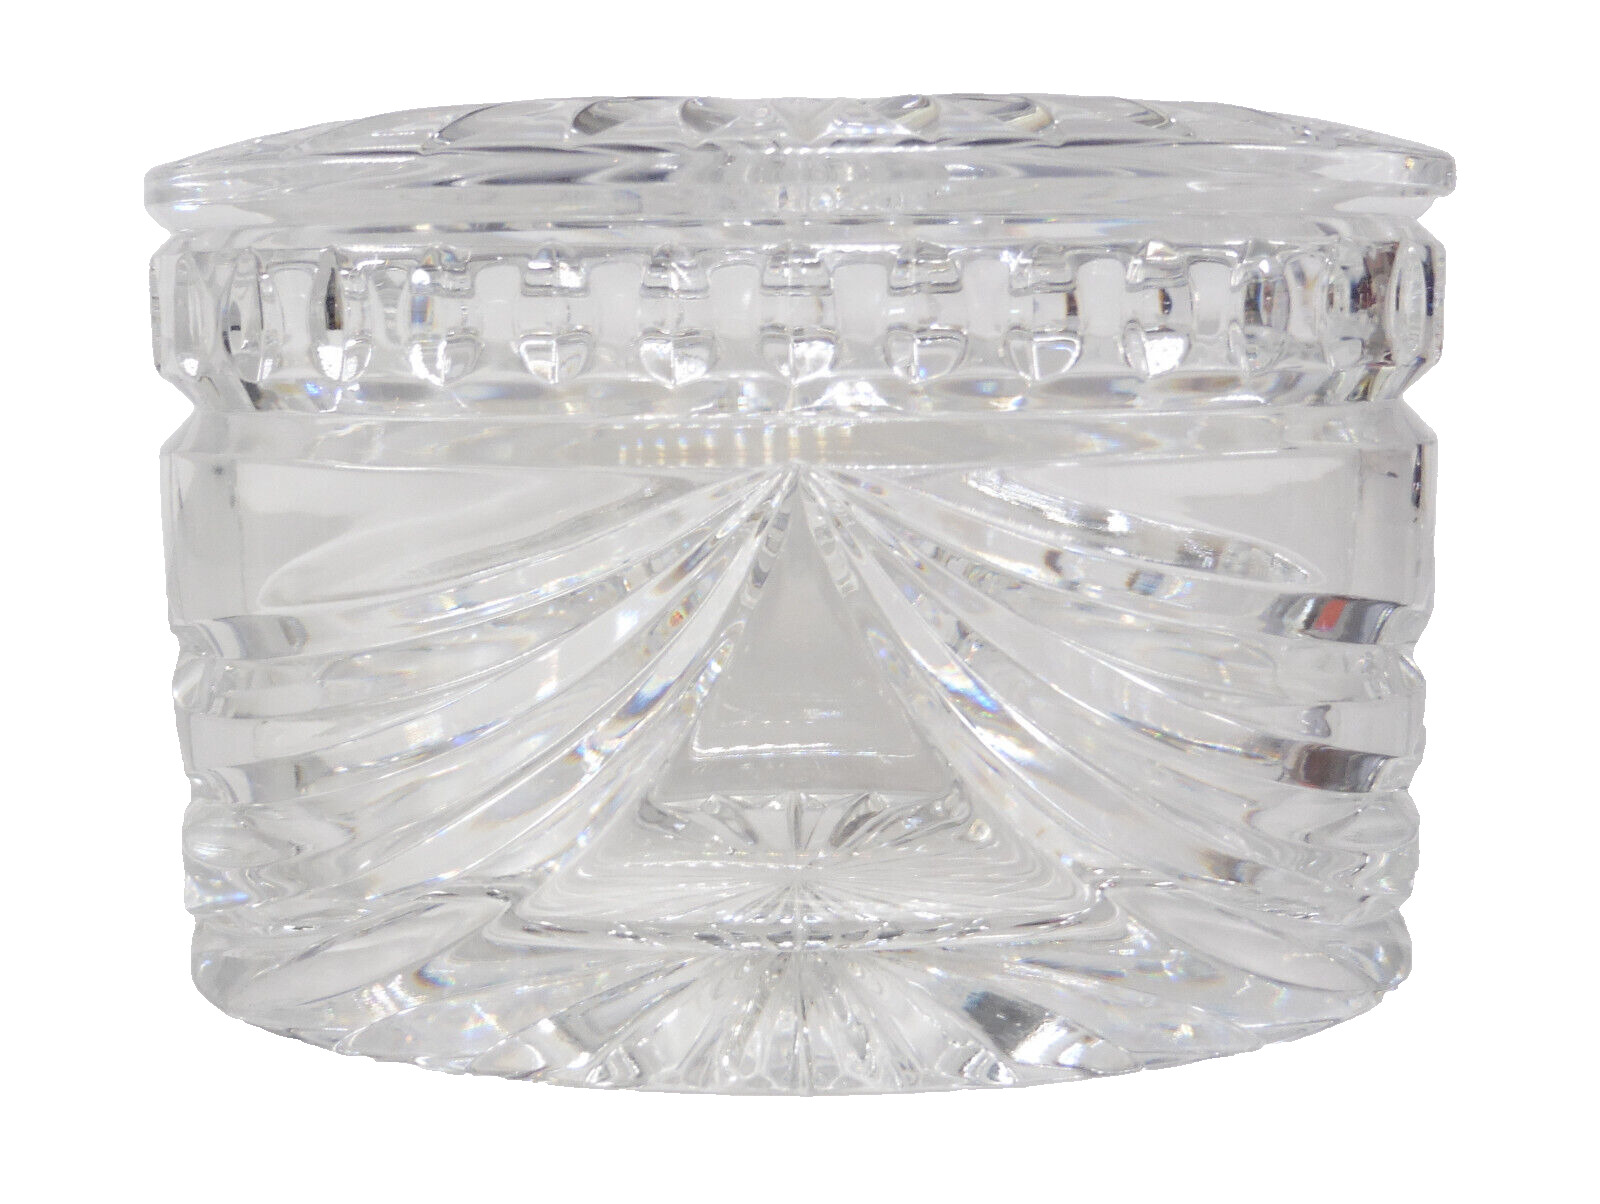 Waterford Overture Crystal Oval Trinket Box W/ Lid